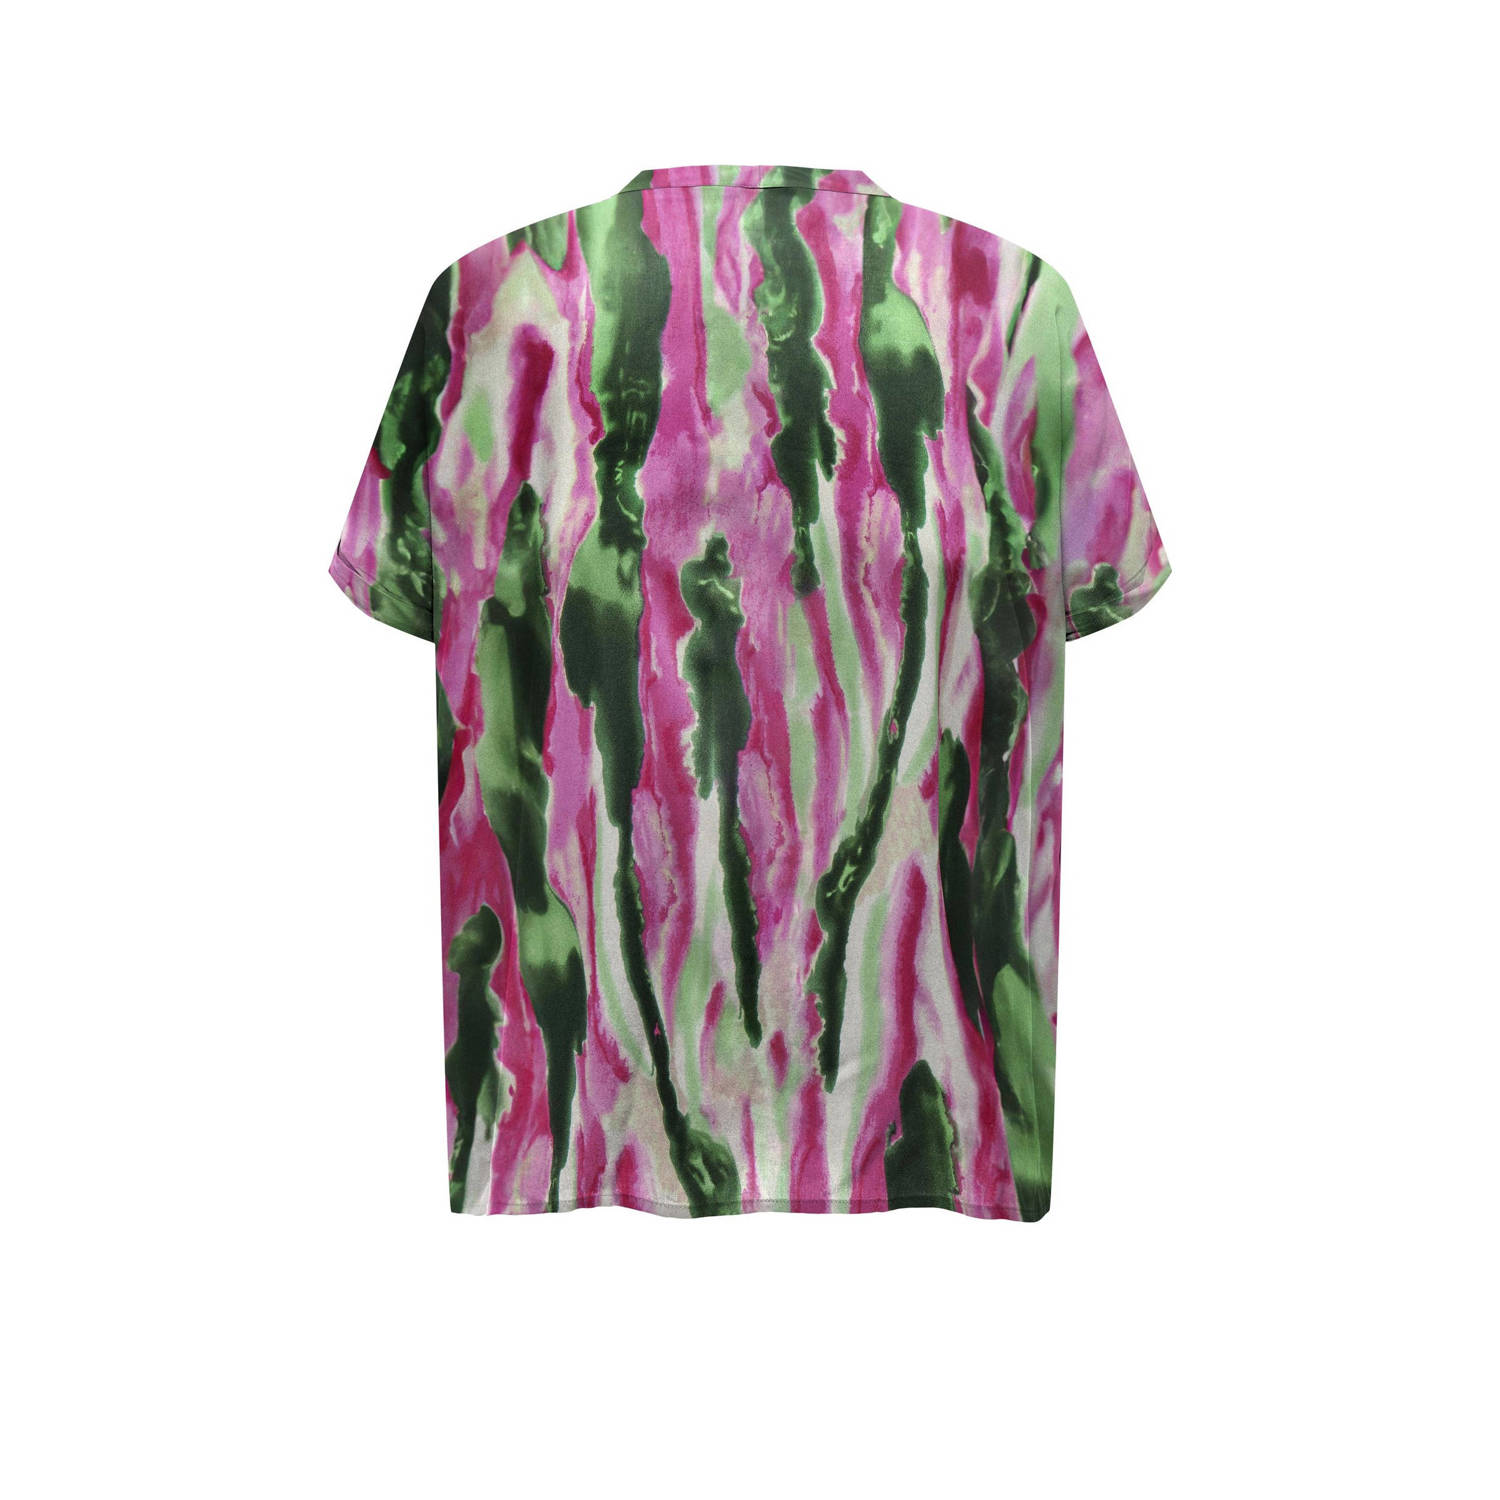 ONLY CARMAKOMA top CARNATA DODIE met all over print roze groen